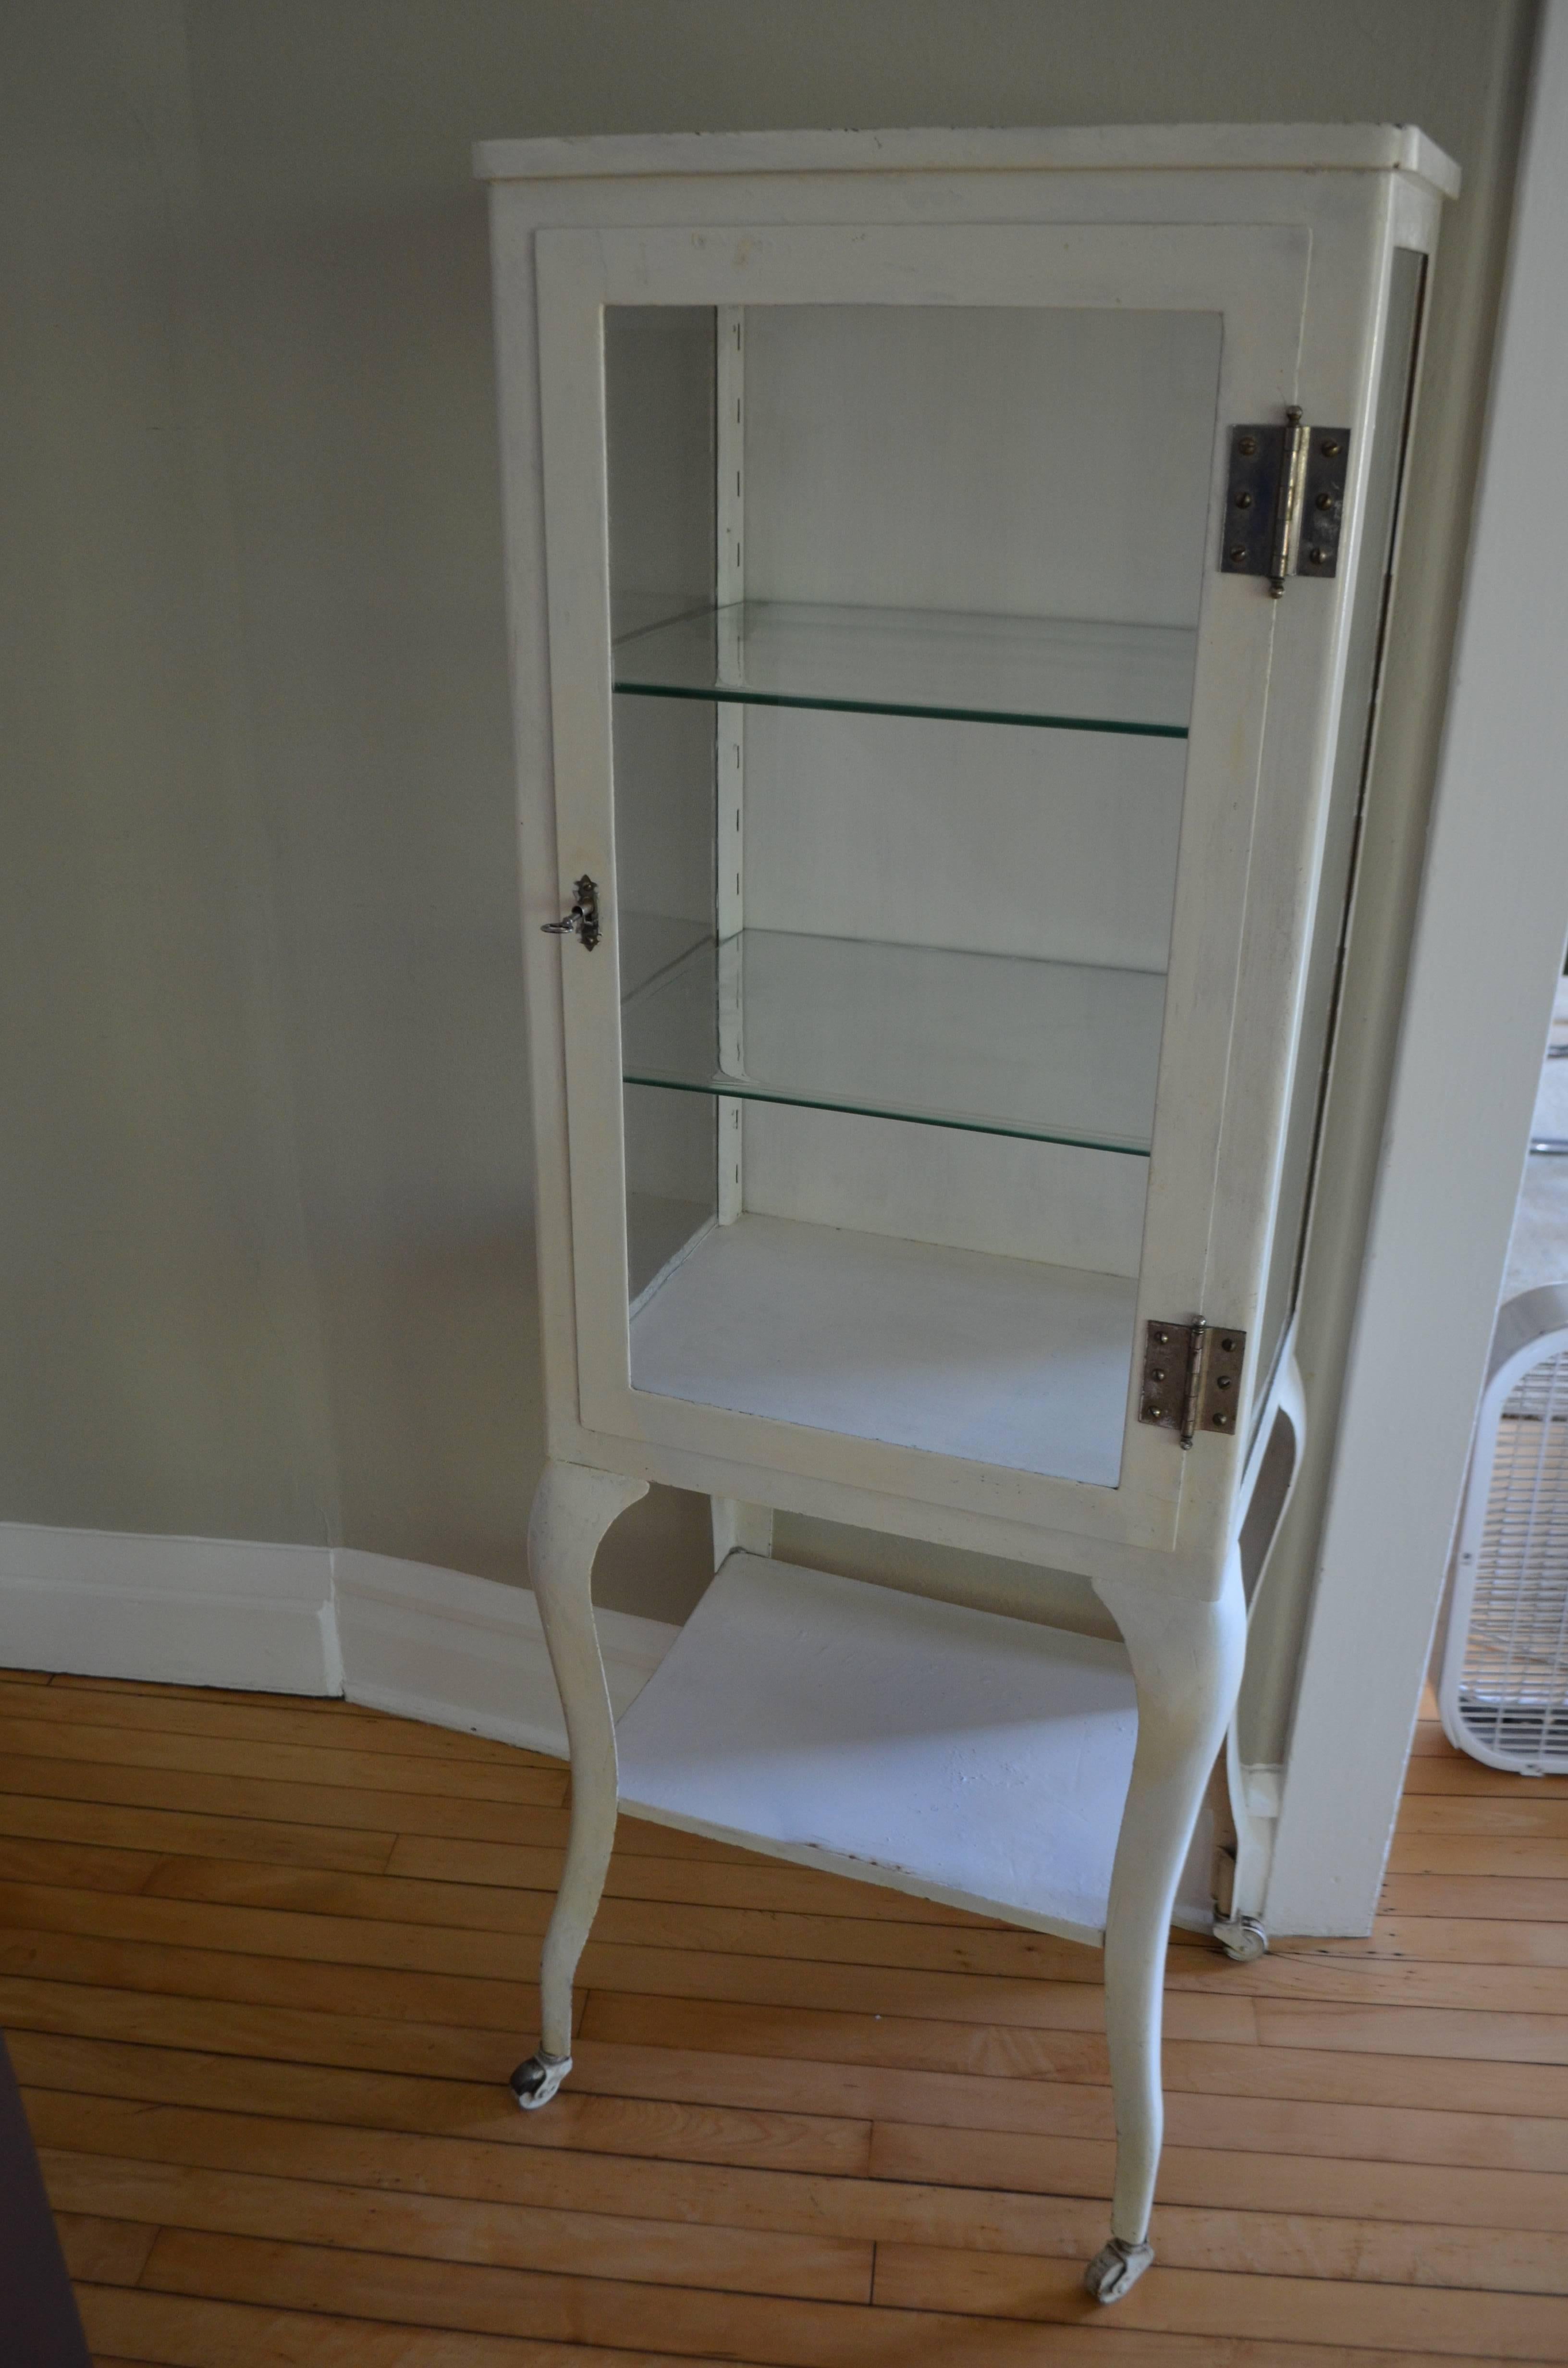 In as-found white enamel and with wheels. Original key included and works to lock the cabinet tightly. Two adjustable, original thick glass shelves with beveled edges. Use for storage or as bar. If you prefer, it could be stripped to bare steel and